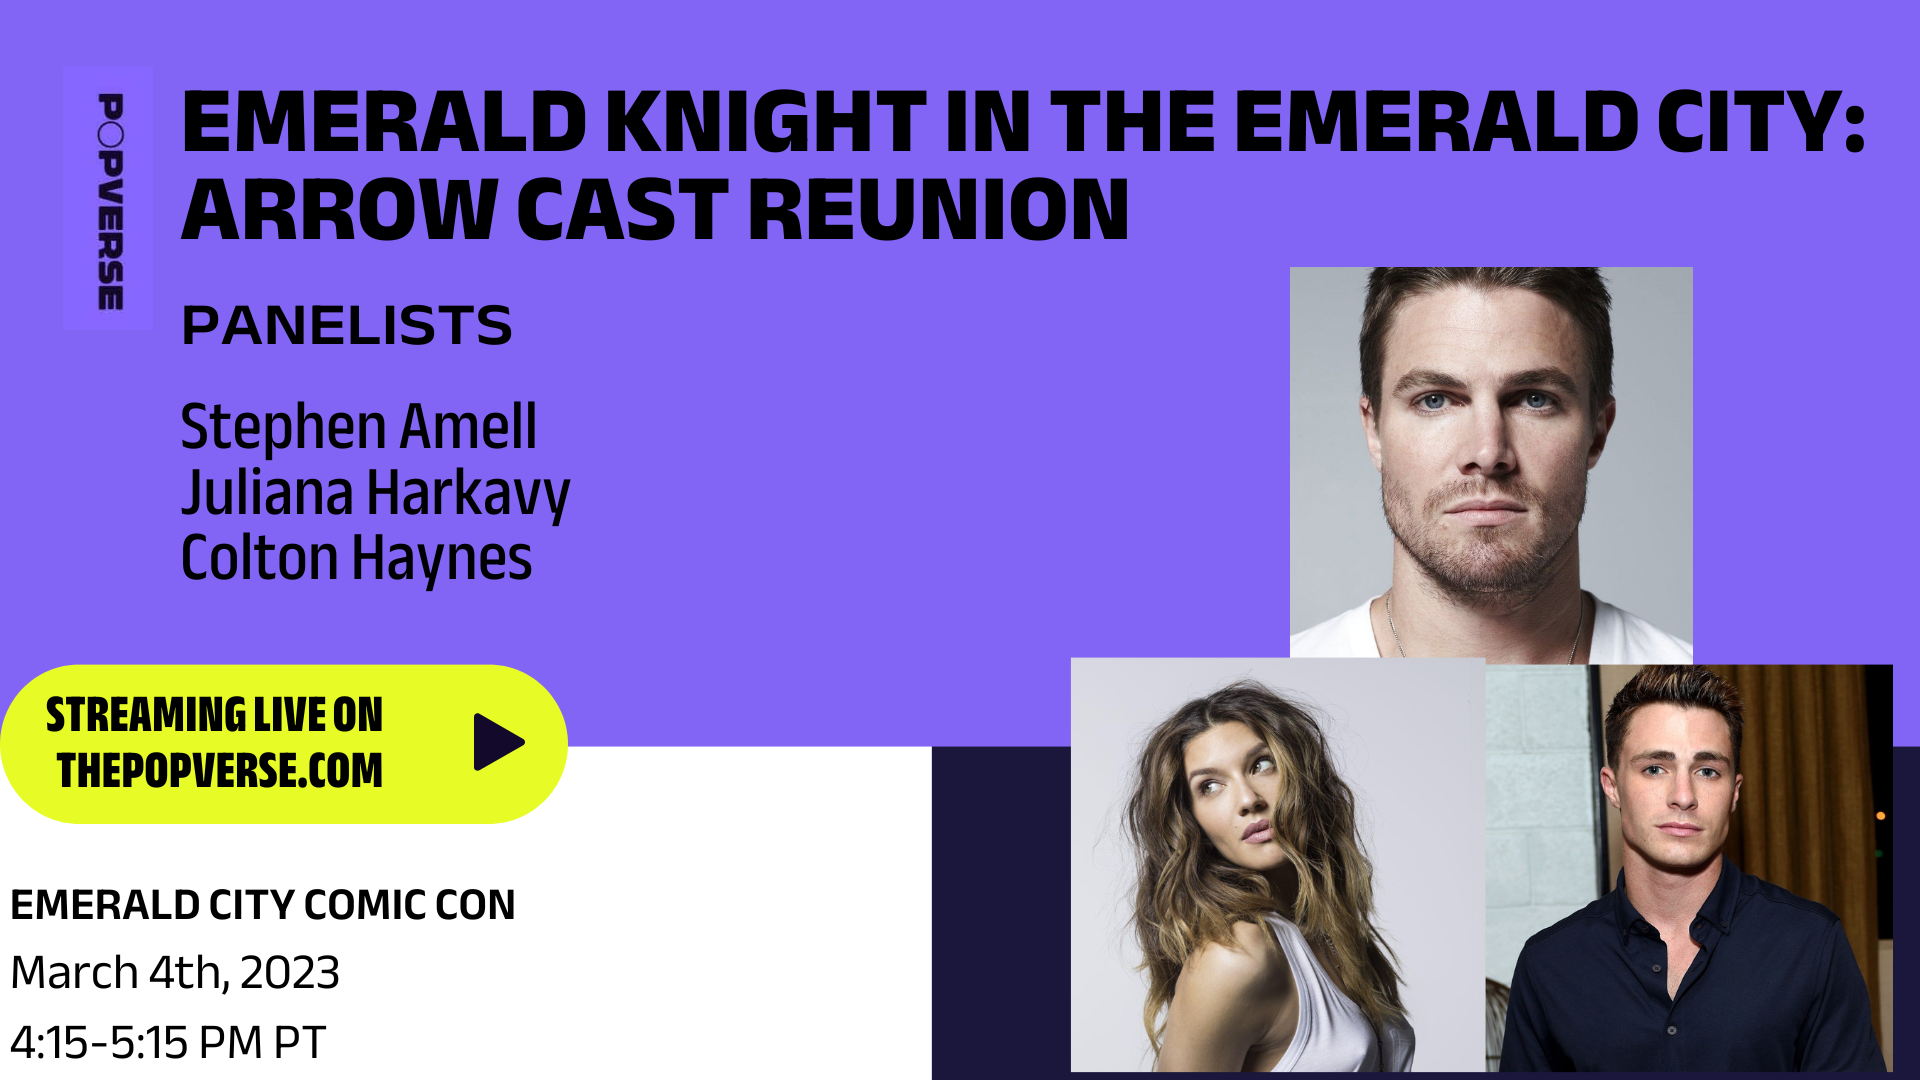 Image for Watch the Arrow cast reunion with Stephen Amell, Juliana Harkavy, and Colton Haynes live from ECCC '23